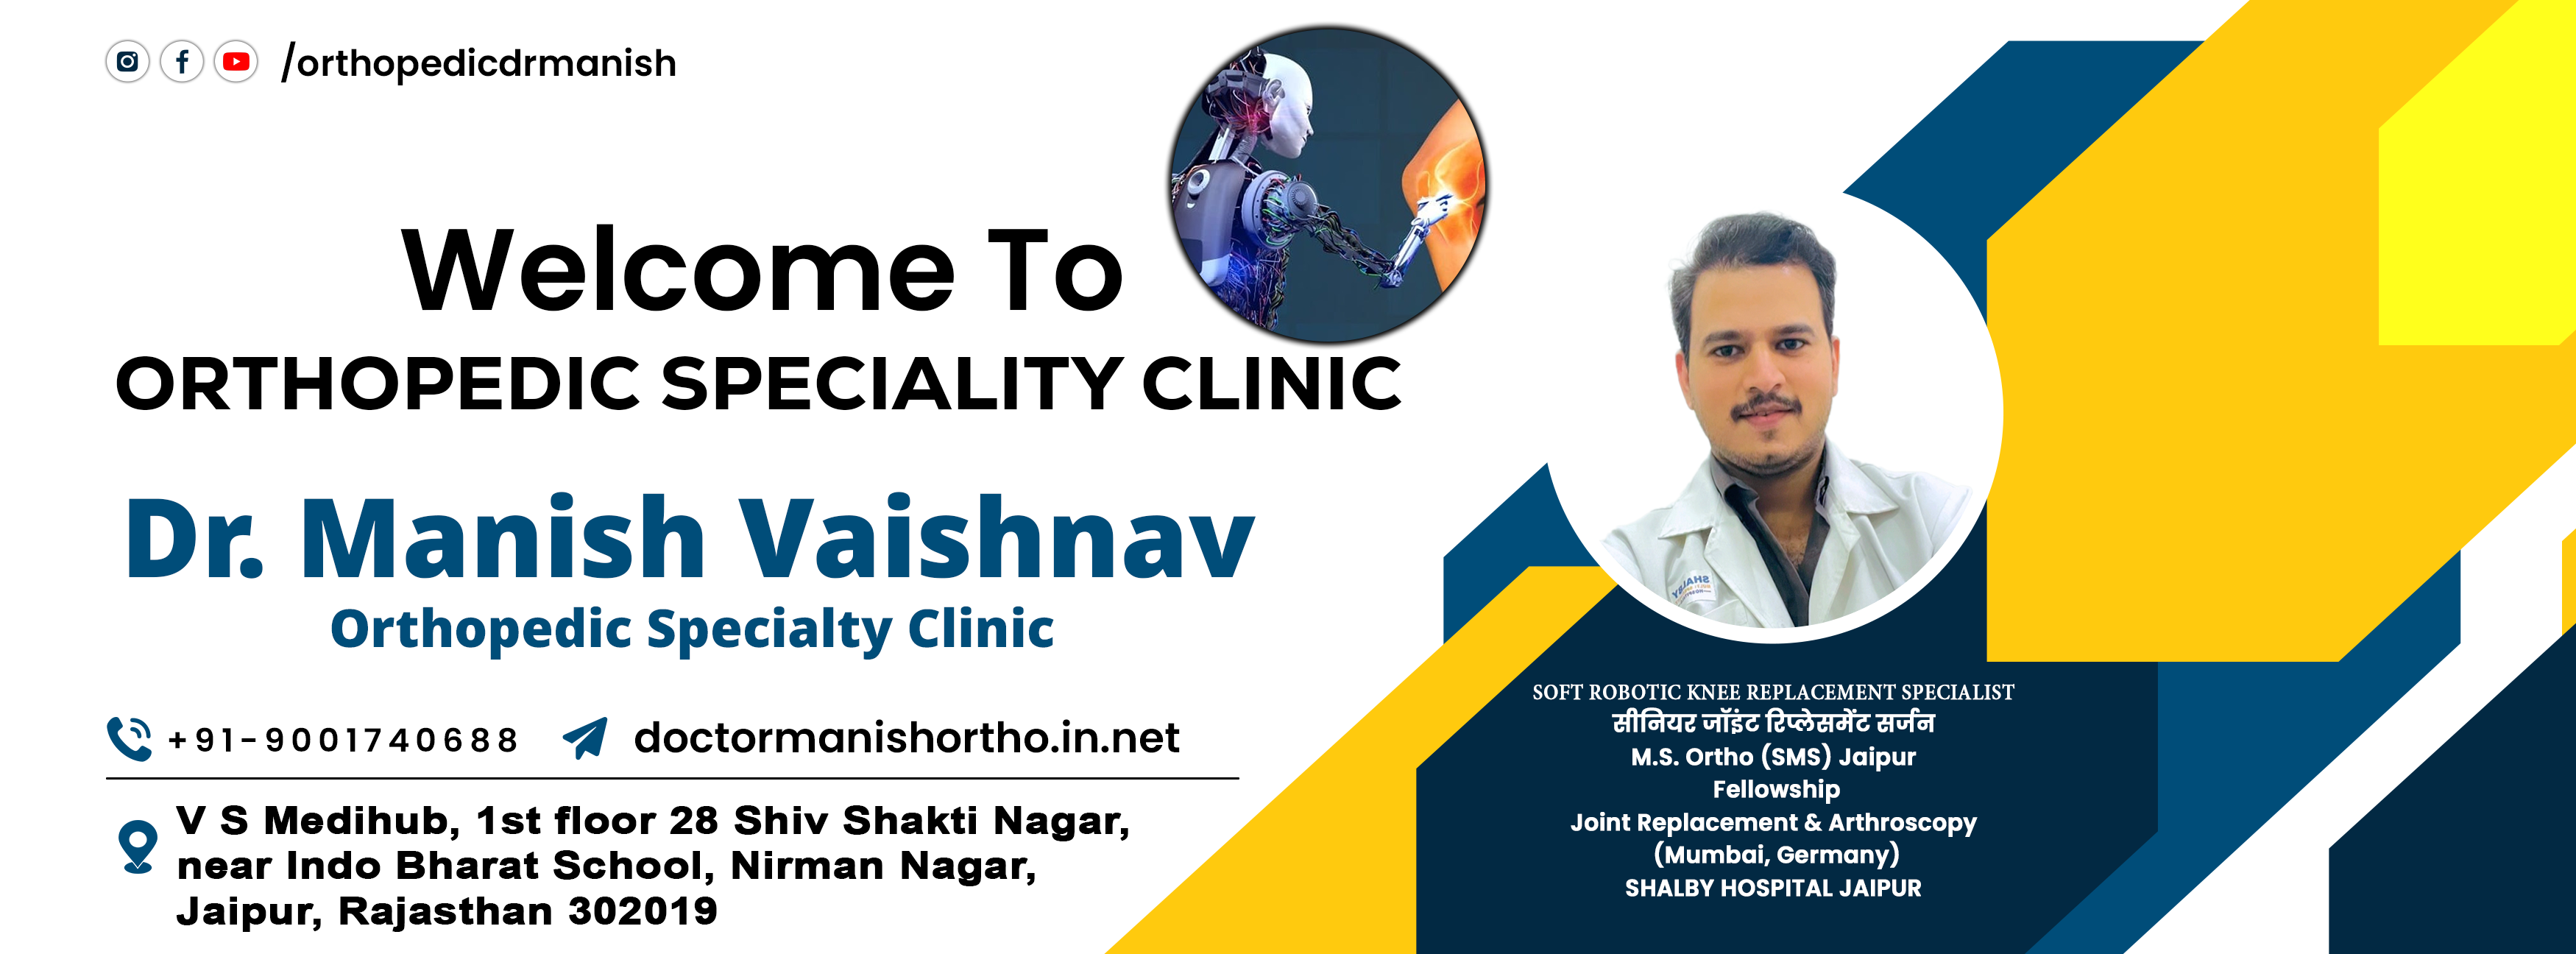 Dr Manish Vaishnav- Ligament Surgeon in Jaipur, ACL Doctor|Healthcare|Medical Services